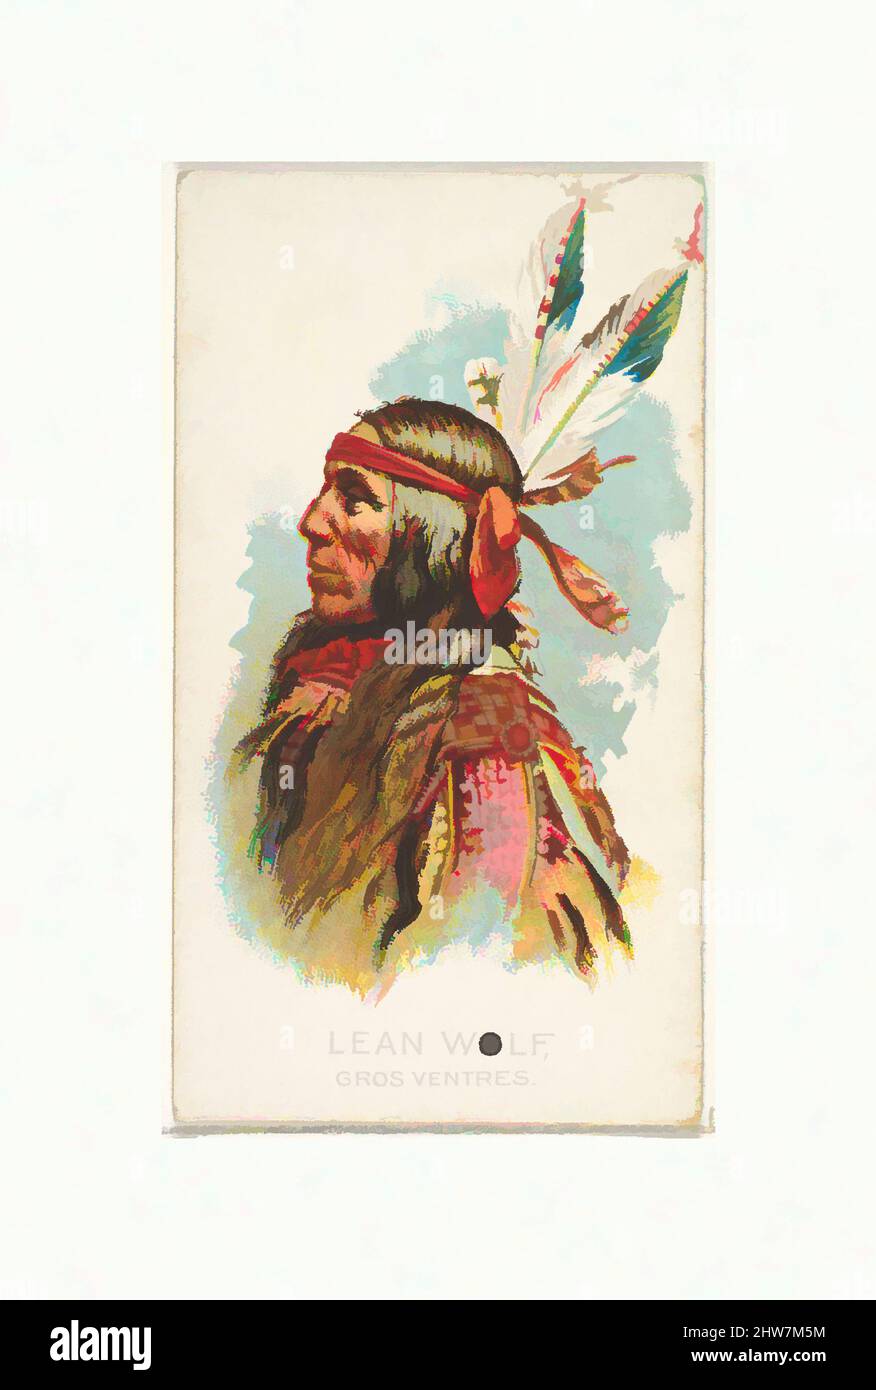 Art inspired by Lean Wolf, Gros Ventres, from the American Indian Chiefs series (N2) for Allen & Ginter Cigarettes Brands, 1888, Commercial color lithograph, Sheet: 2 3/4 x 1 1/2 in. (7 x 3.8 cm), Trade cards from the 'American Indian Chiefs' series (N2), issued in 1888 in a series of, Classic works modernized by Artotop with a splash of modernity. Shapes, color and value, eye-catching visual impact on art. Emotions through freedom of artworks in a contemporary way. A timeless message pursuing a wildly creative new direction. Artists turning to the digital medium and creating the Artotop NFT Stock Photo